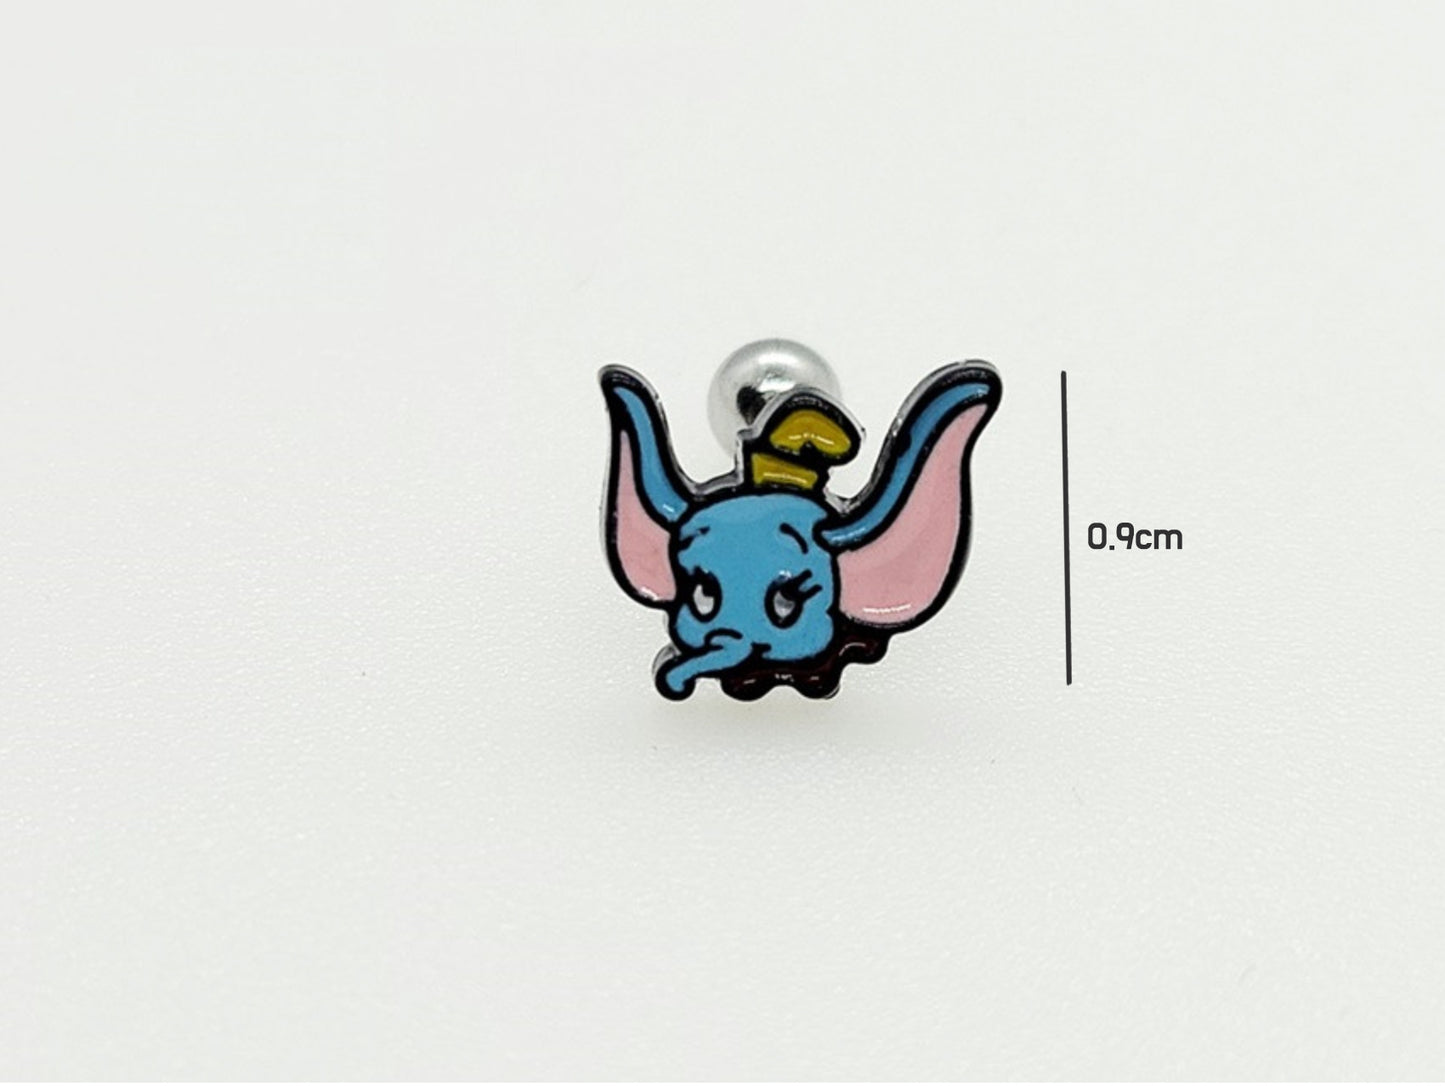 Cute Disney characters Marie cat, Dumbo crew back Barbells Ear Piercing, Surgical Steel cartilage stud, helix stud, tragus conch